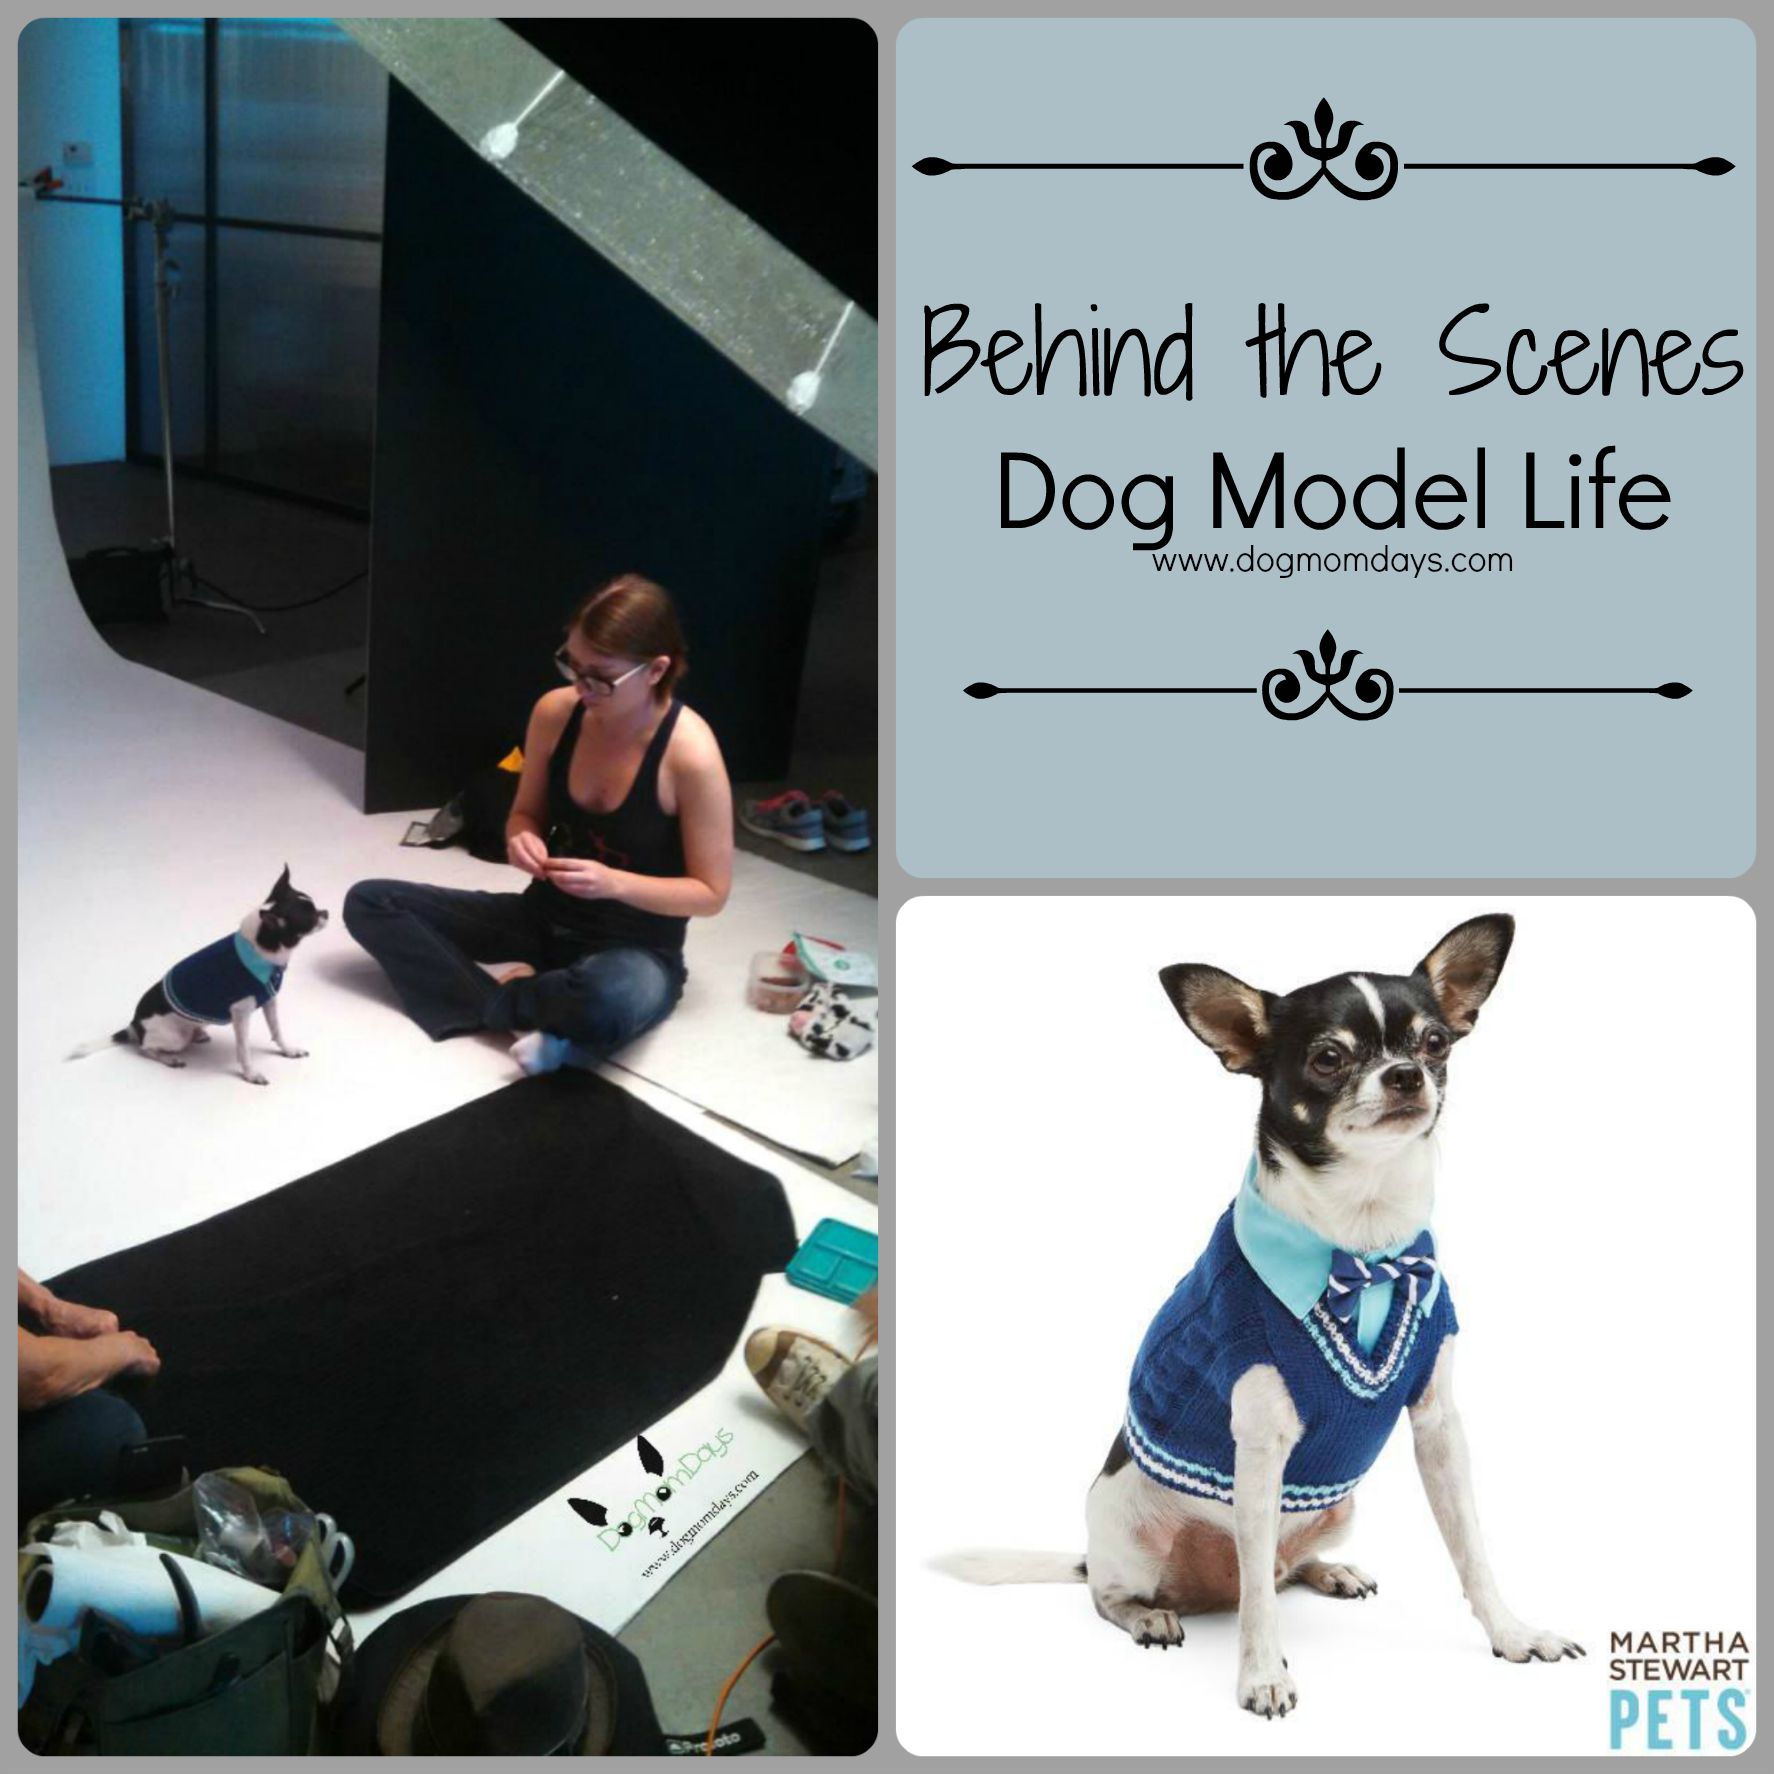 The behind the scenes photo was taken at one of Wynston's PetSmart photo shoots. This photo is being shared with the permission of Arizona Animal Actors and the client. 